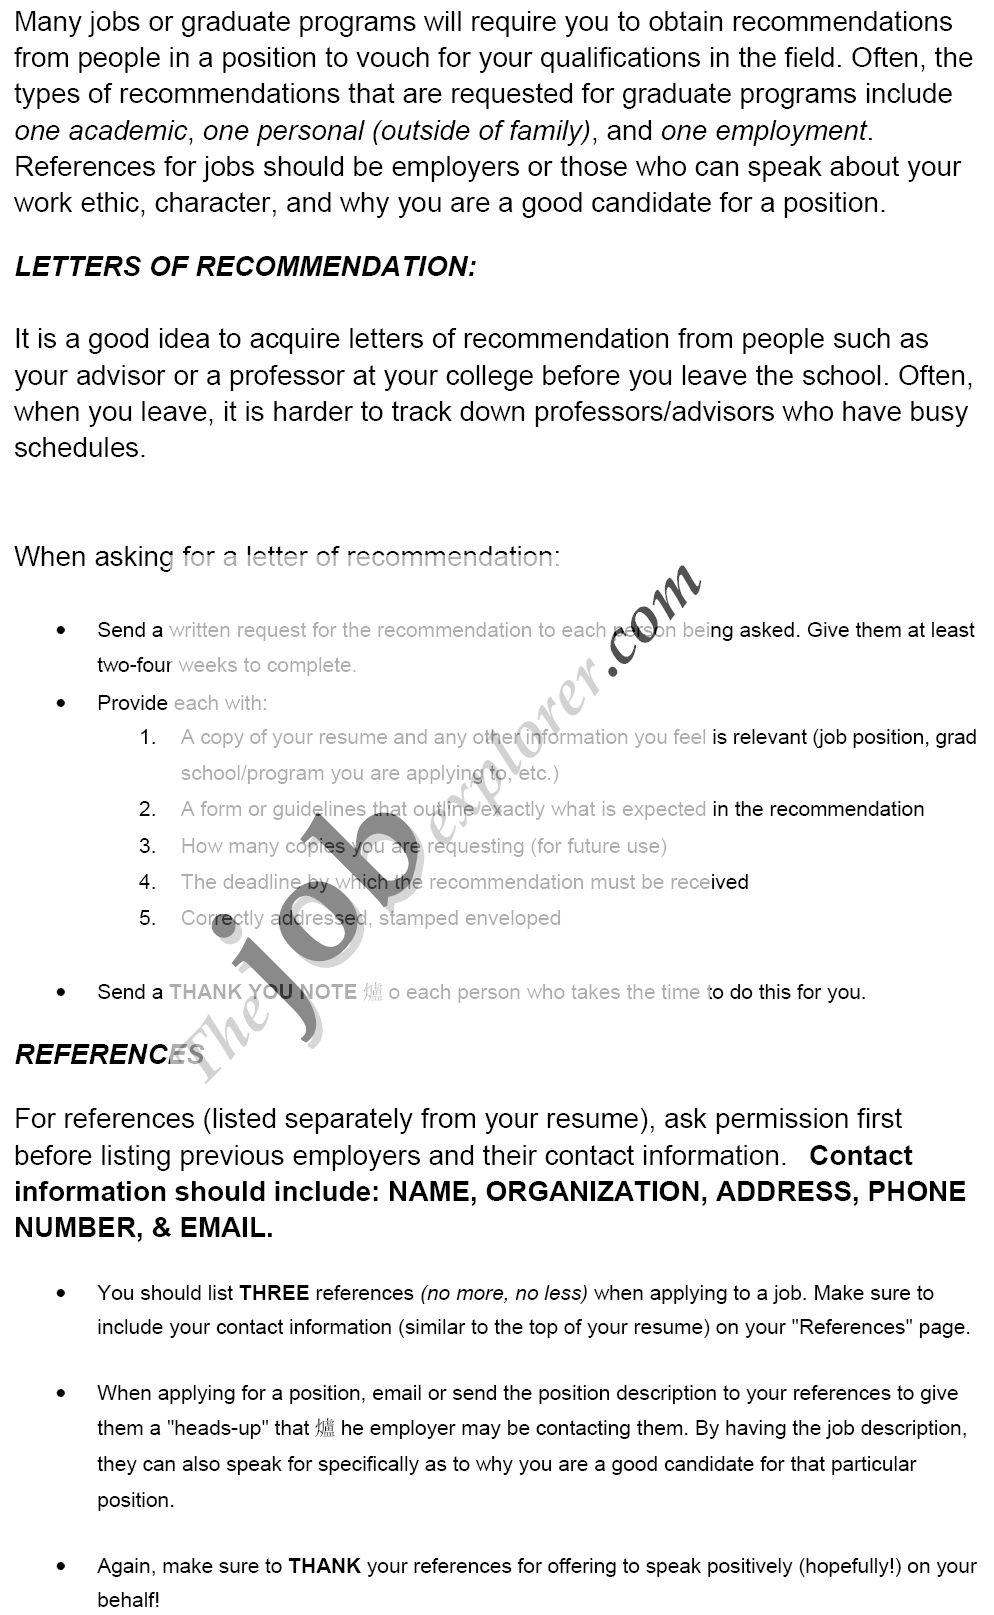 College Letter Of Recommendation From Employer from www.thejobexplorer.com